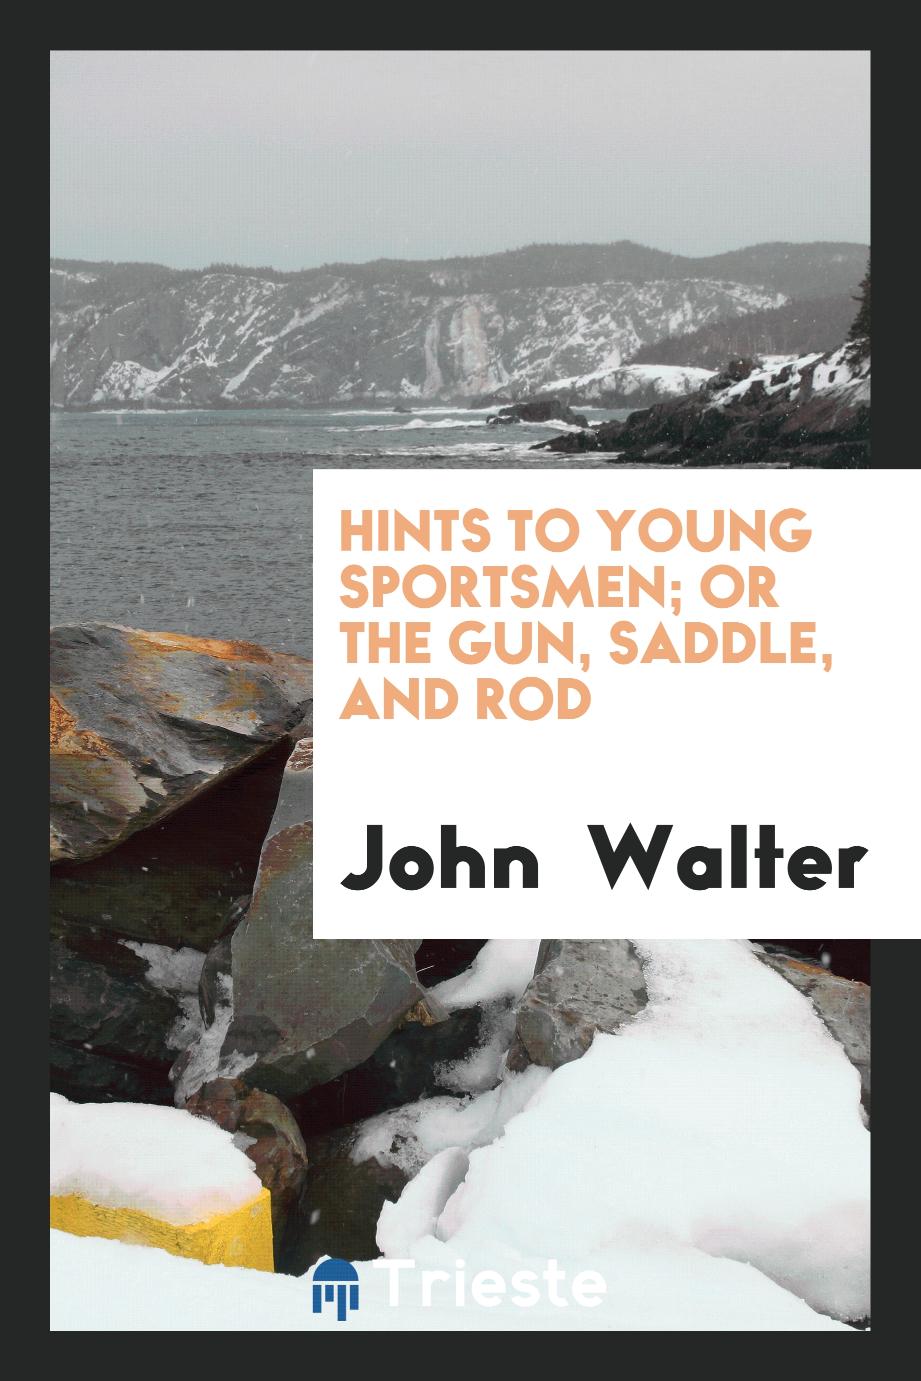 HINTS TO YOUNG SPORTSMEN; or the gun, saddle, and rod